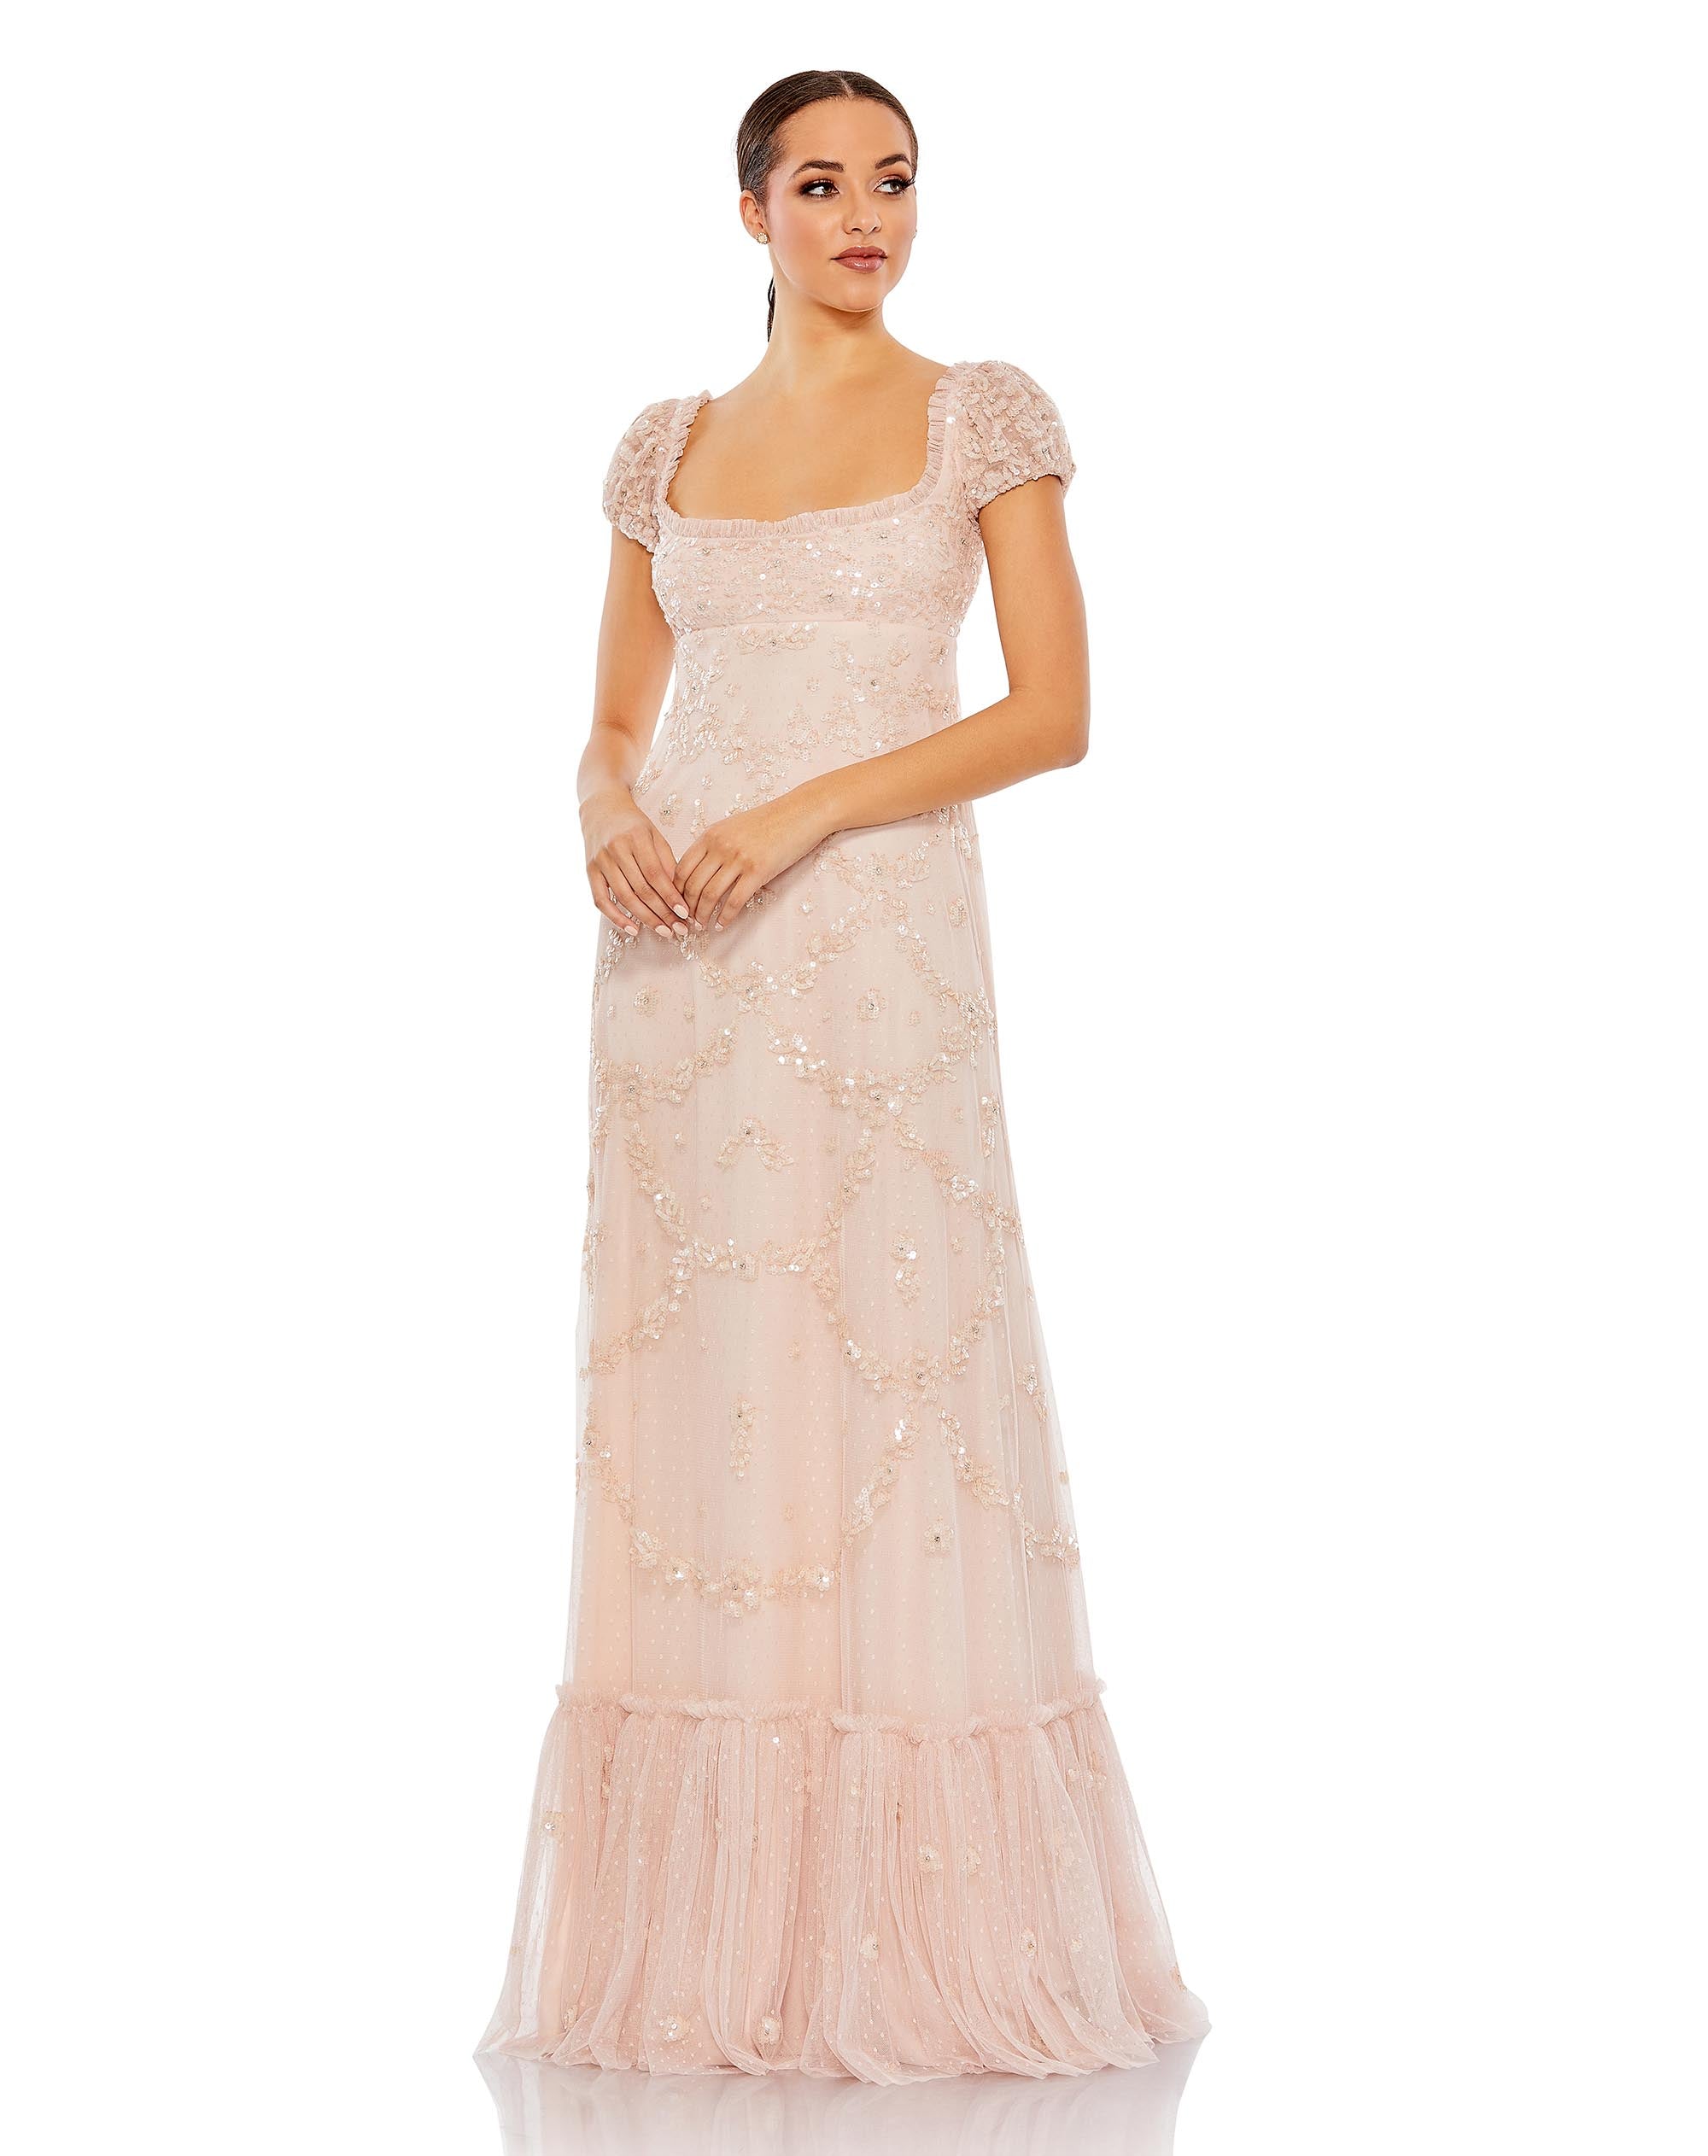 Sequined Empire Waist Puff Cap Sleeve Gown